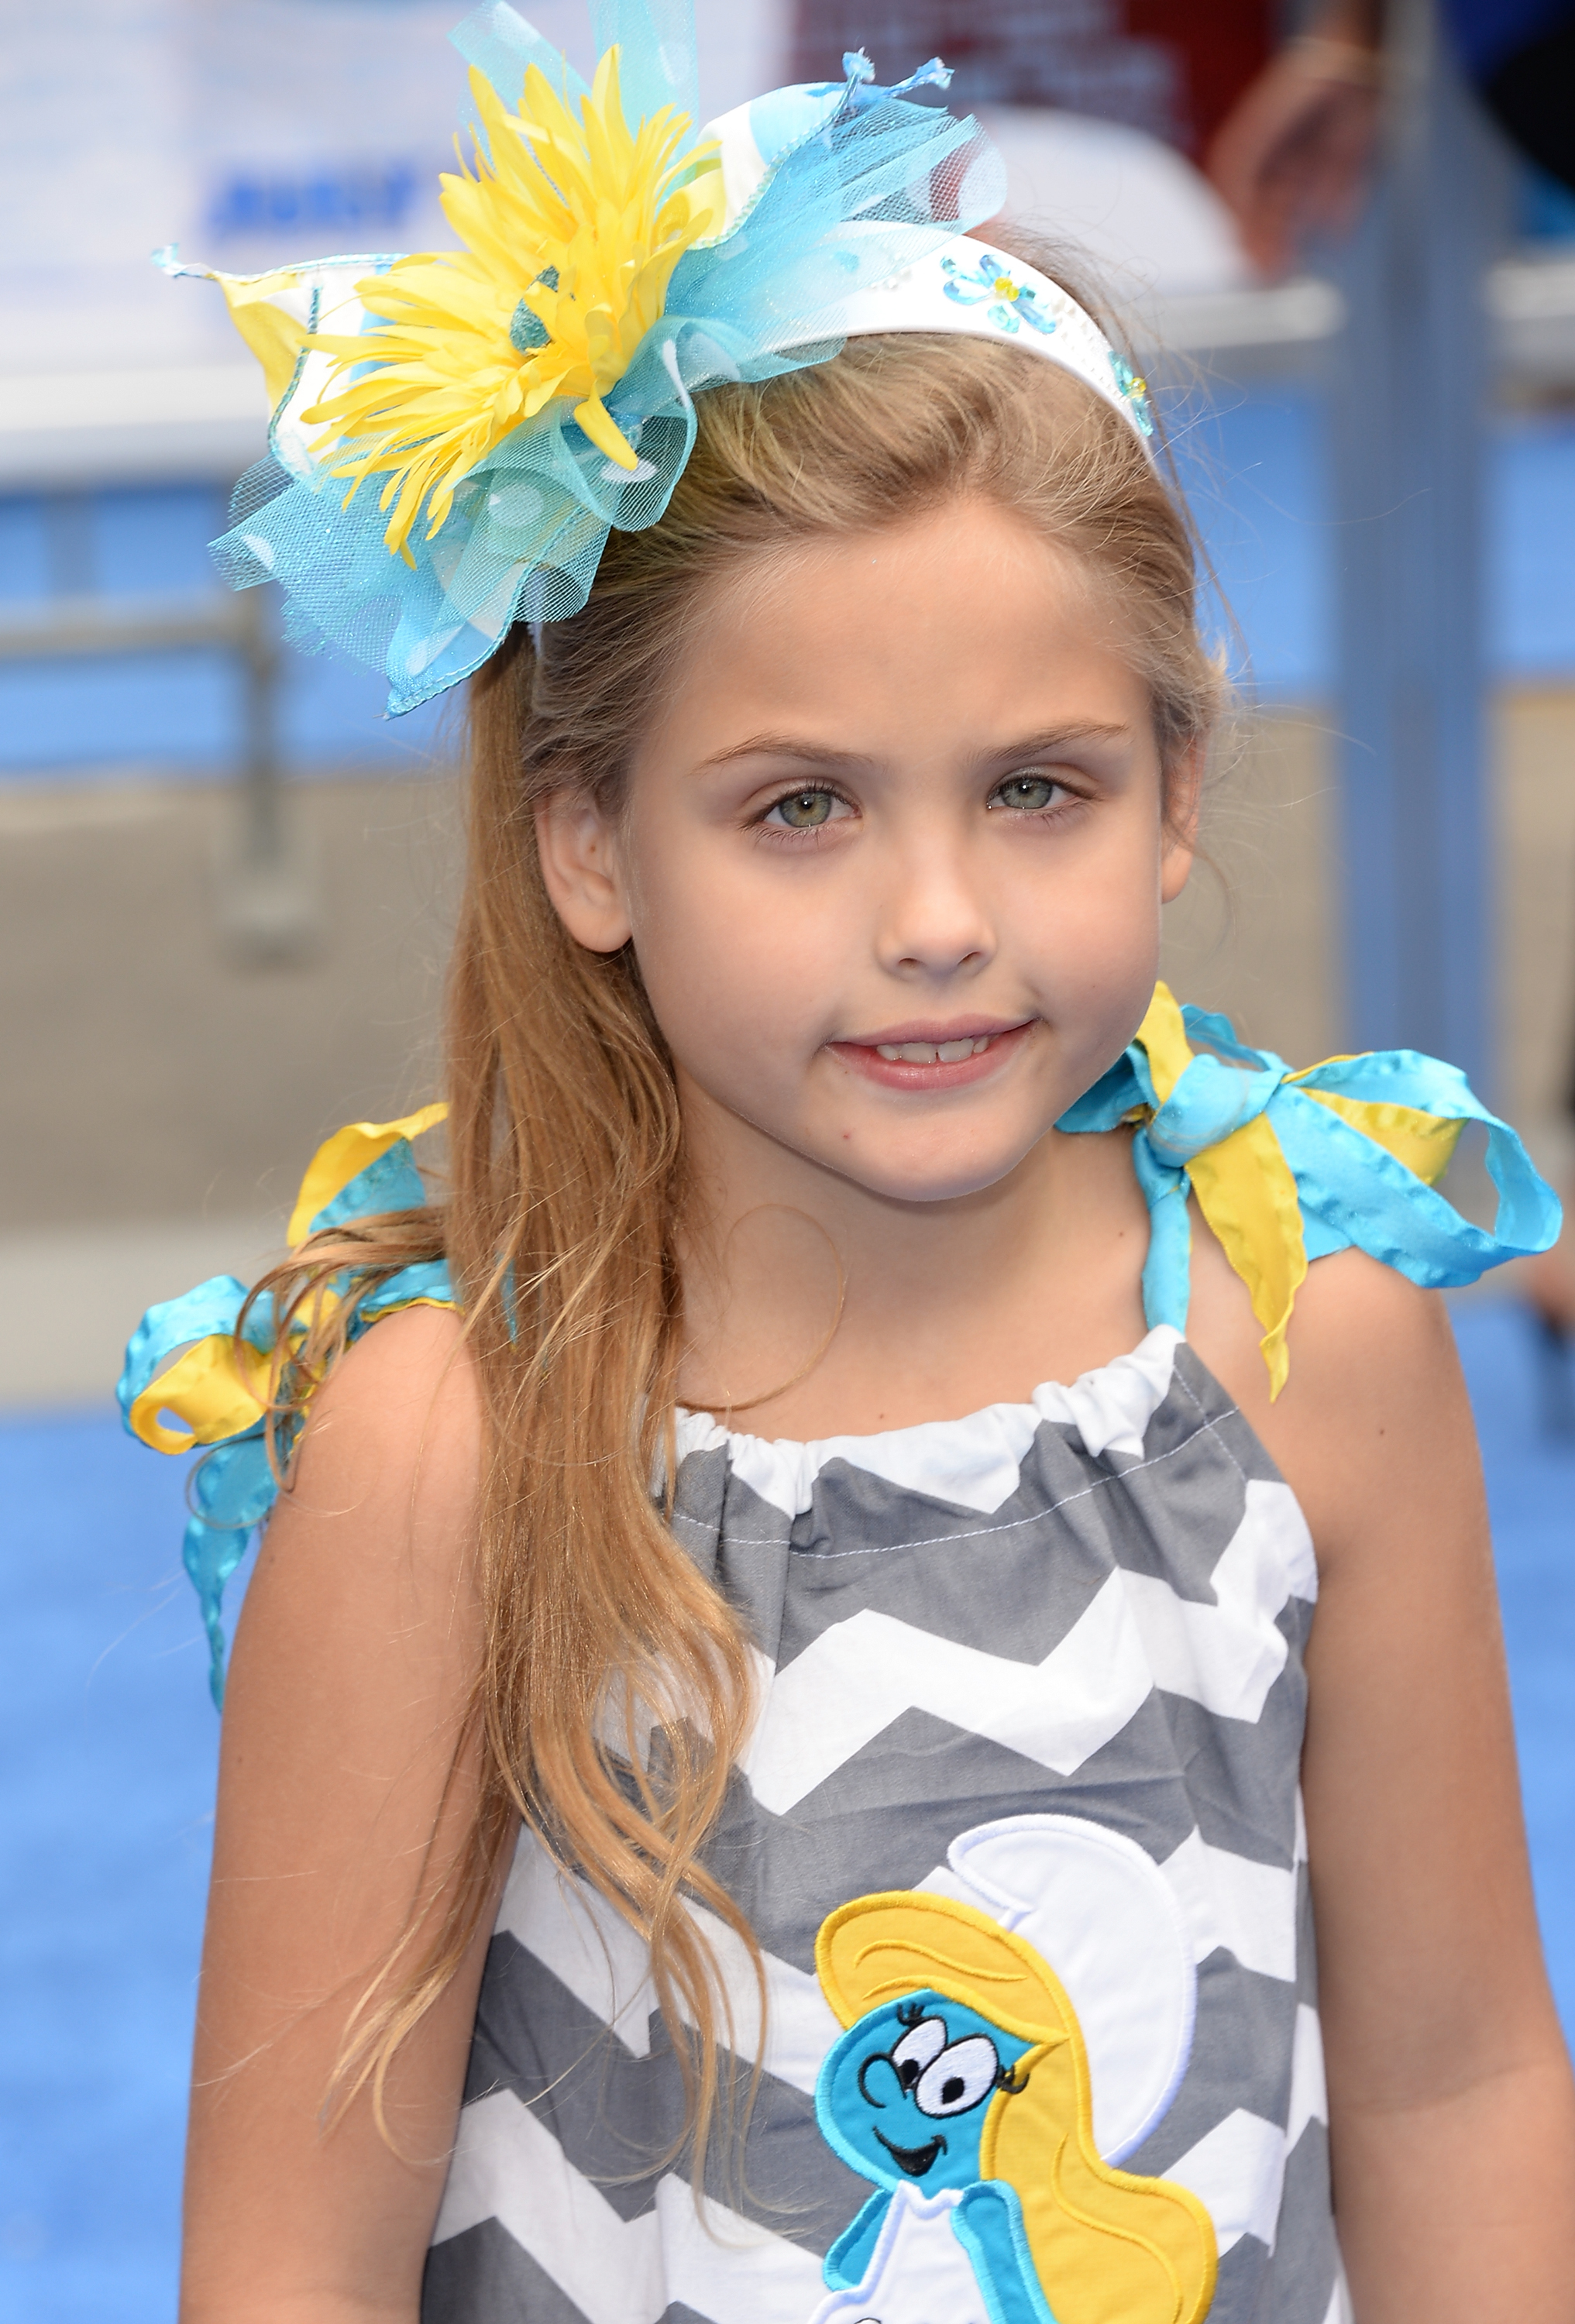 Dannielynn Birkhead attends the premiere of "Smurfs 2" on July 28, 2013 in Westwood, California | Source: Getty Images